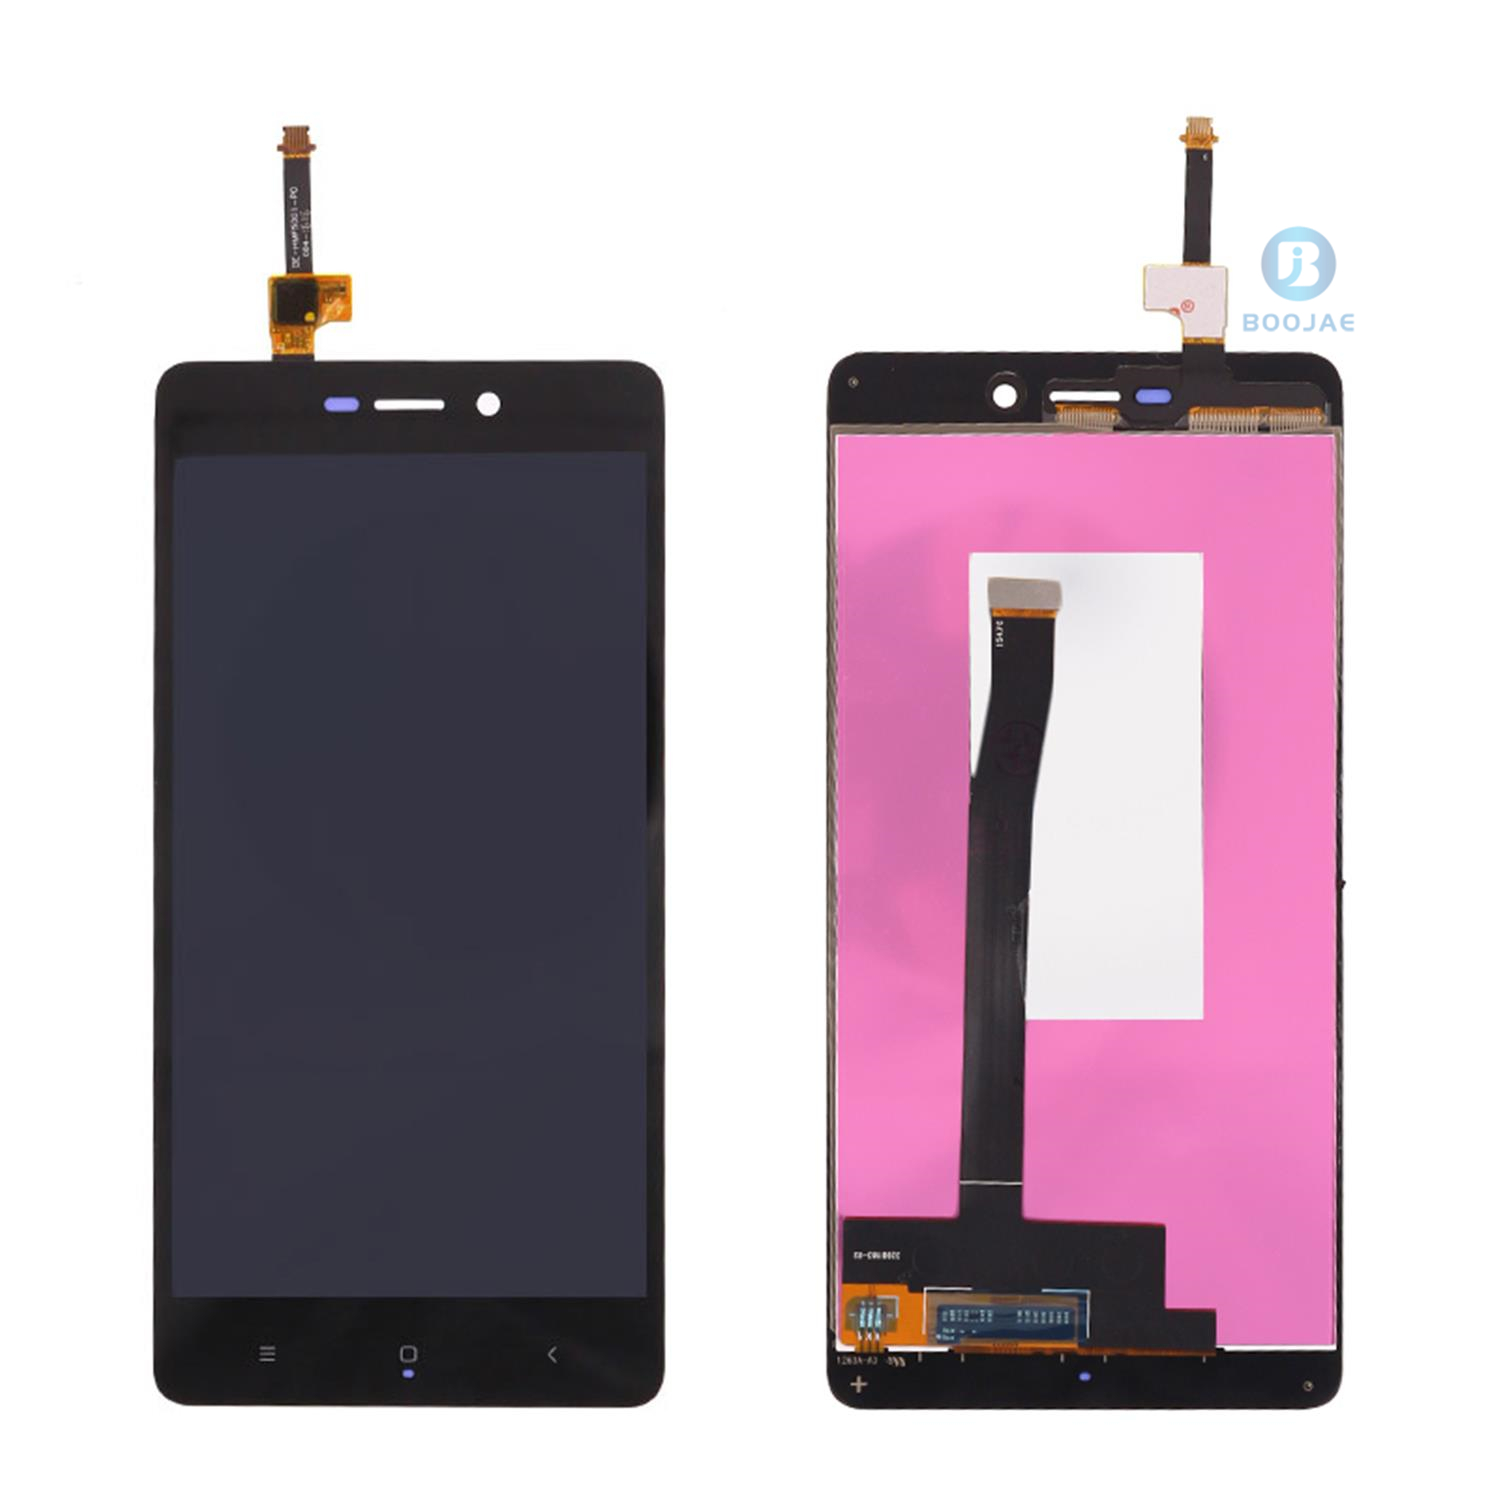 For Xiaomi Redmi 3 LCD Screen Display and Touch Panel Digitizer Assembly Replacement